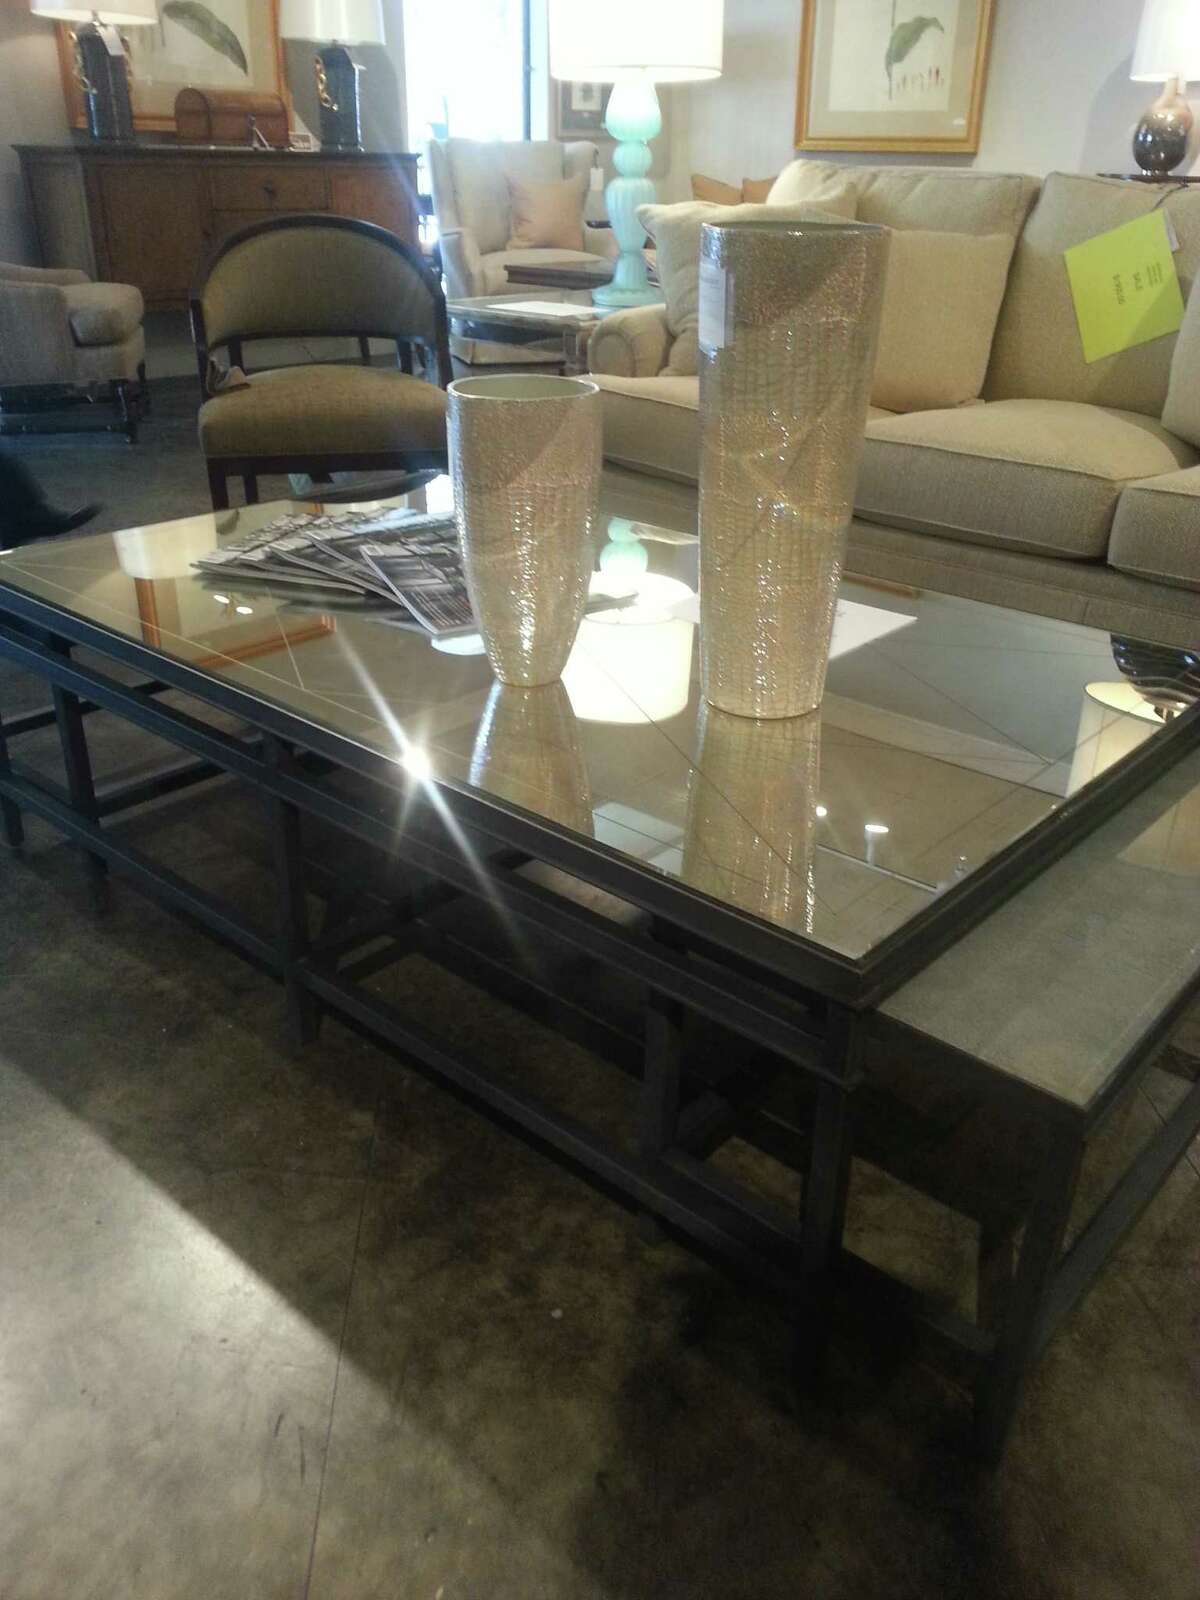 Mirrored coffee table with nesting tables that extend, reg. $3,500, on sale for $1,750 at Bunch & Shoemaker.